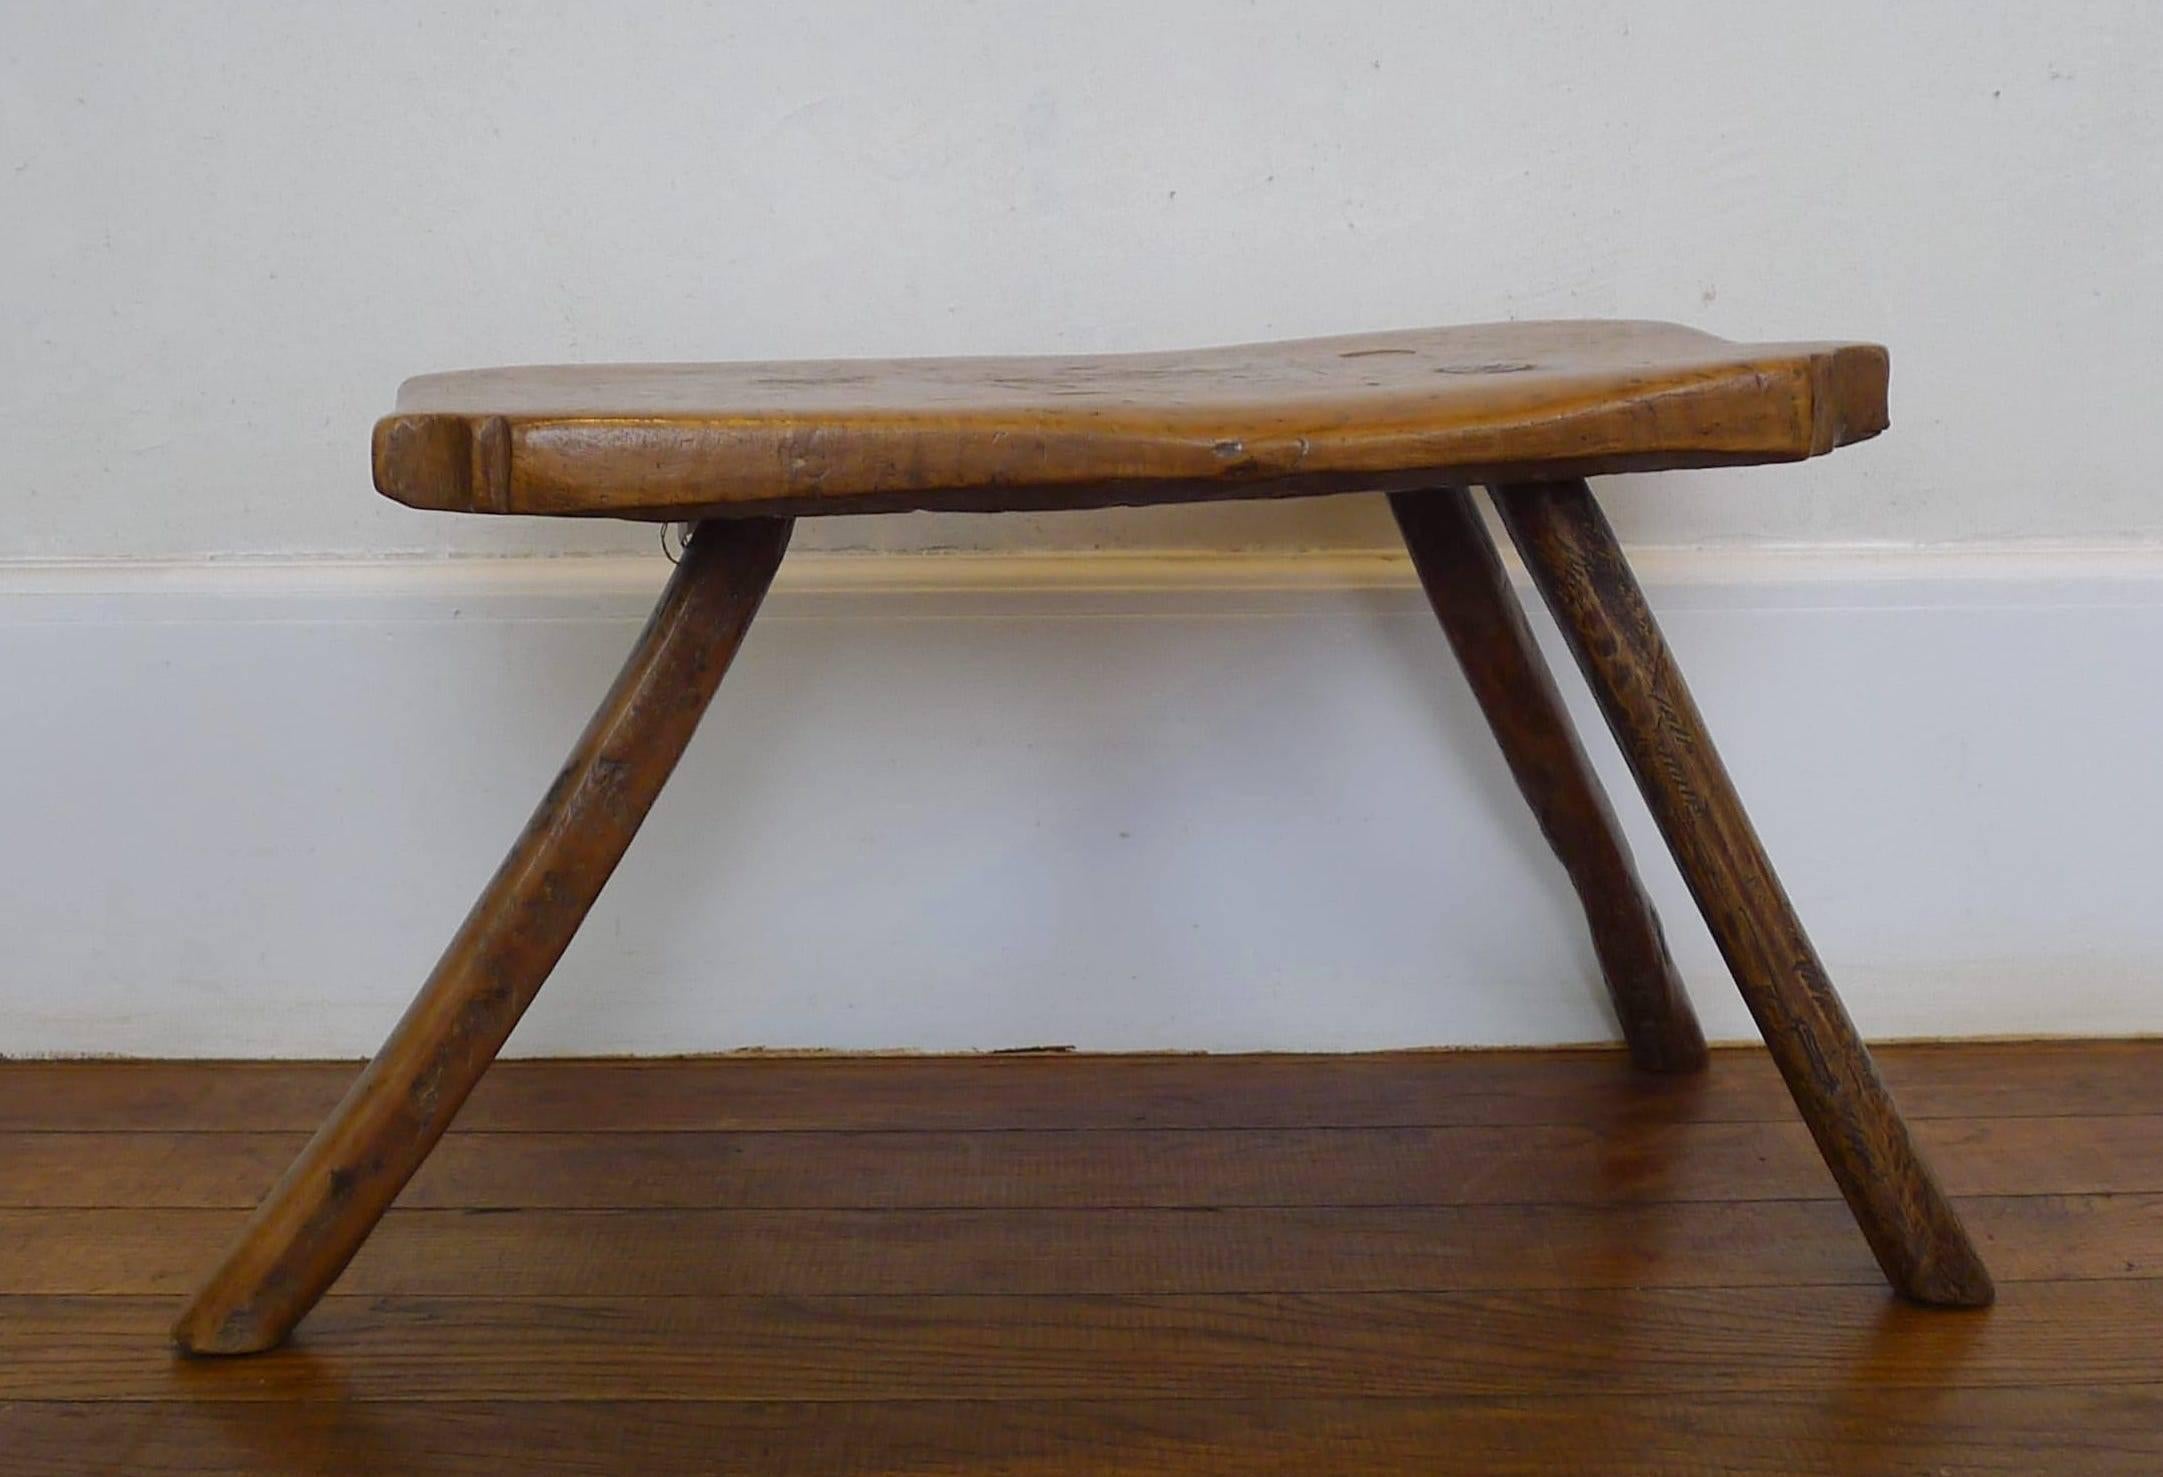 Used as stool or side table, because his height (32cm)

Exceptional patina caused by time and use

France, Alsace.